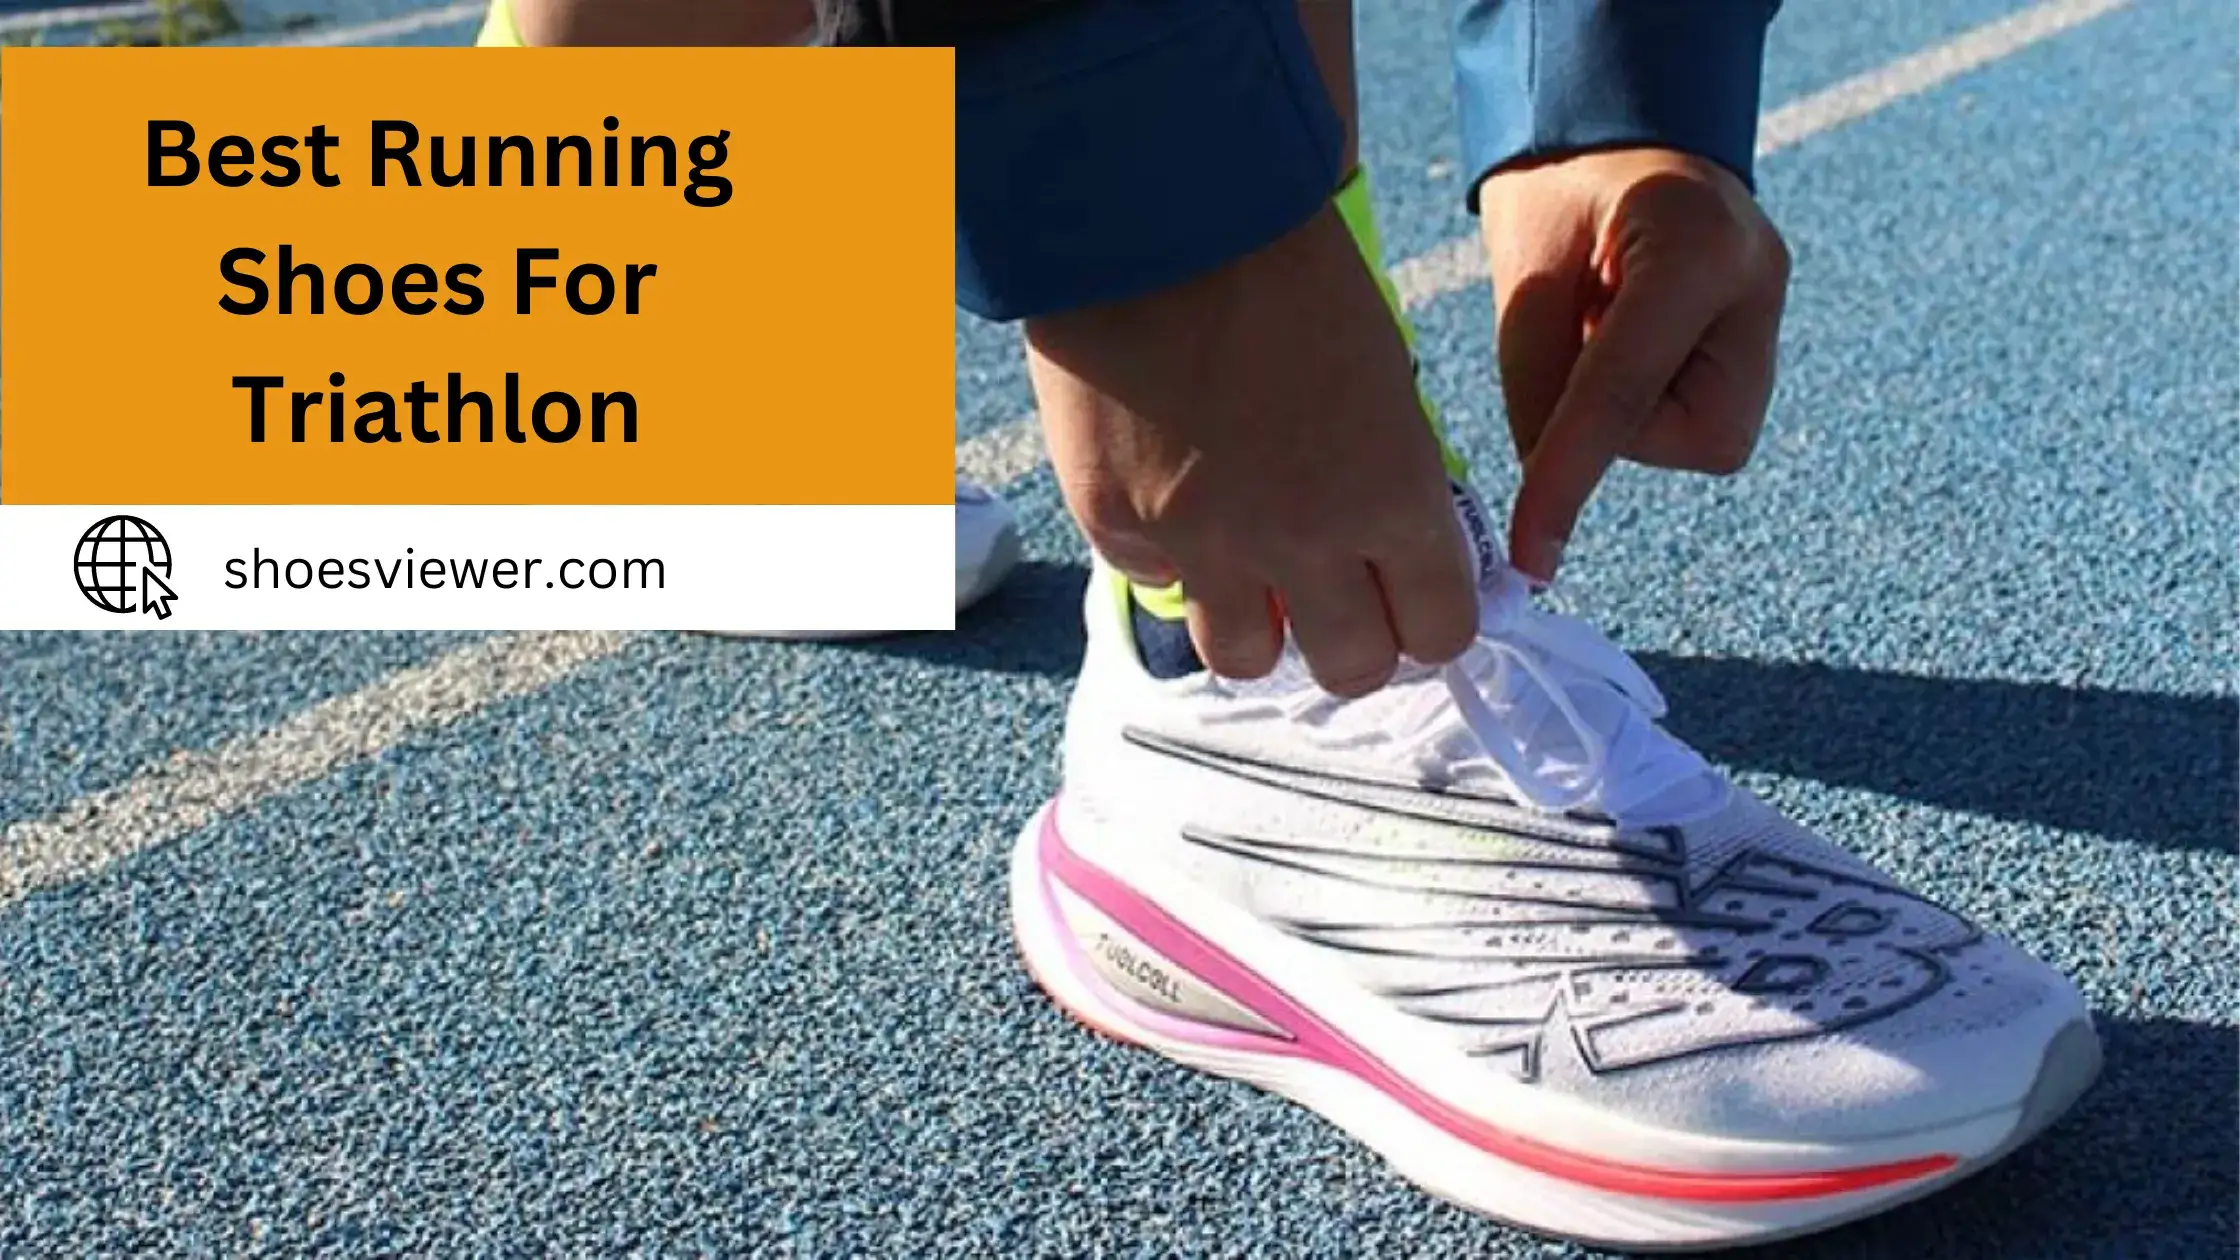 Best Running Shoes For Triathlon - (An In-Depth Guide)